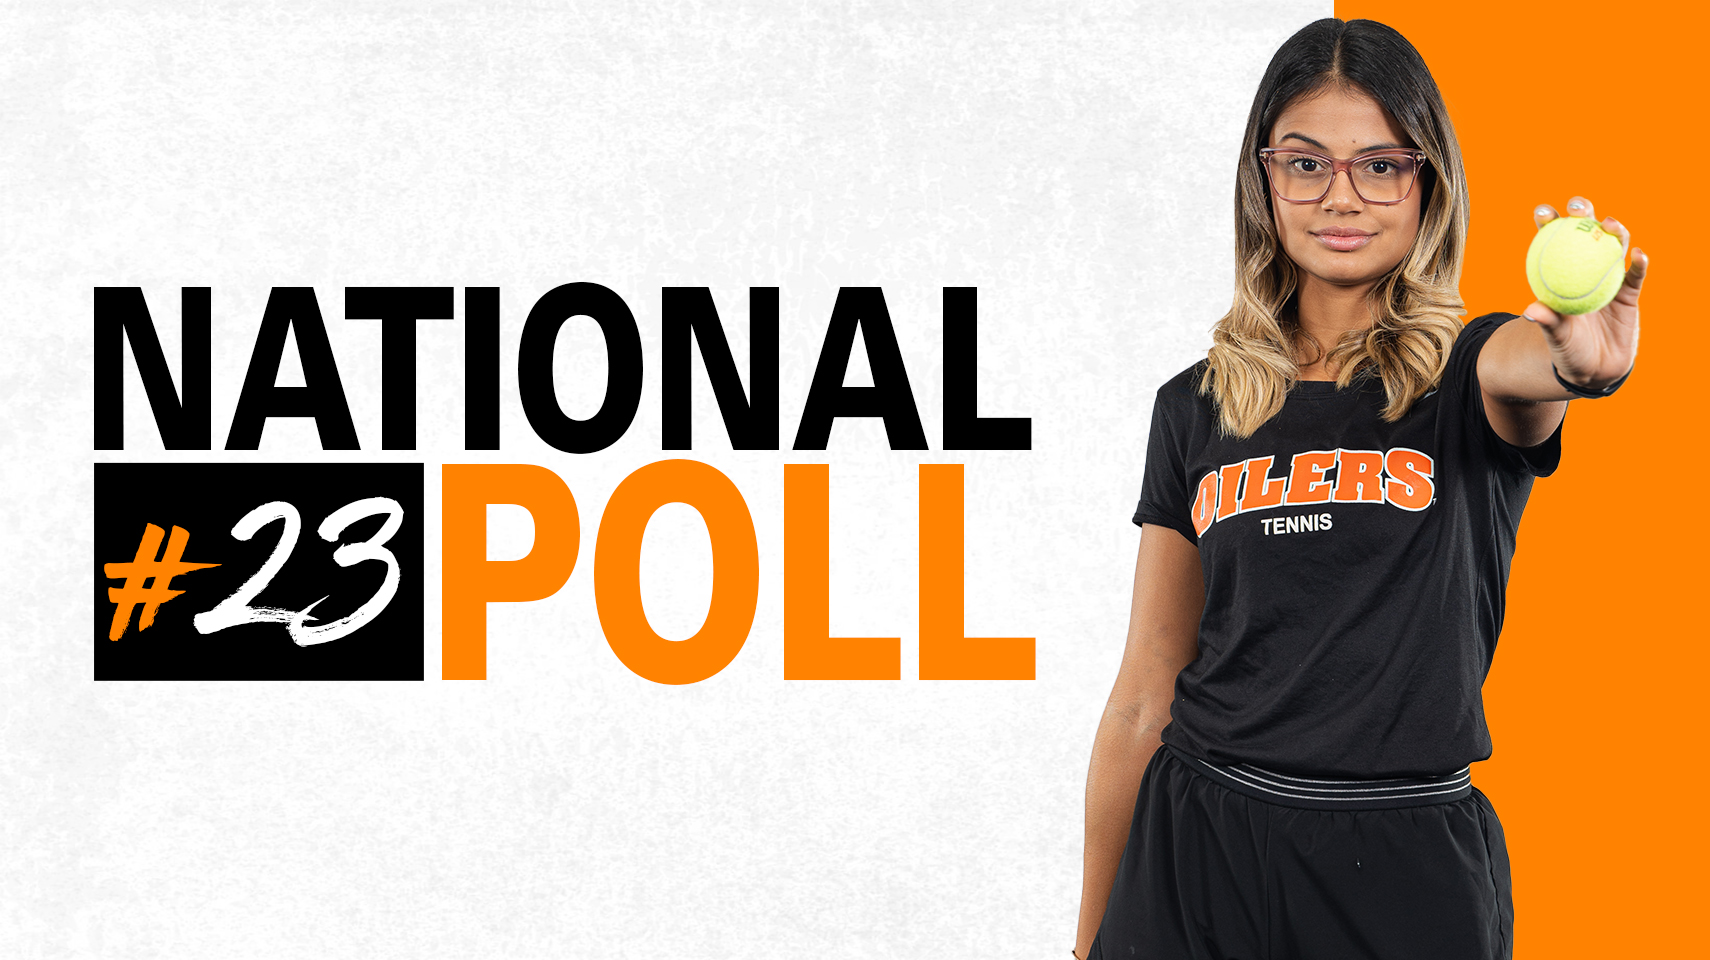 Women's tennis national poll ranking with Laura Brito.